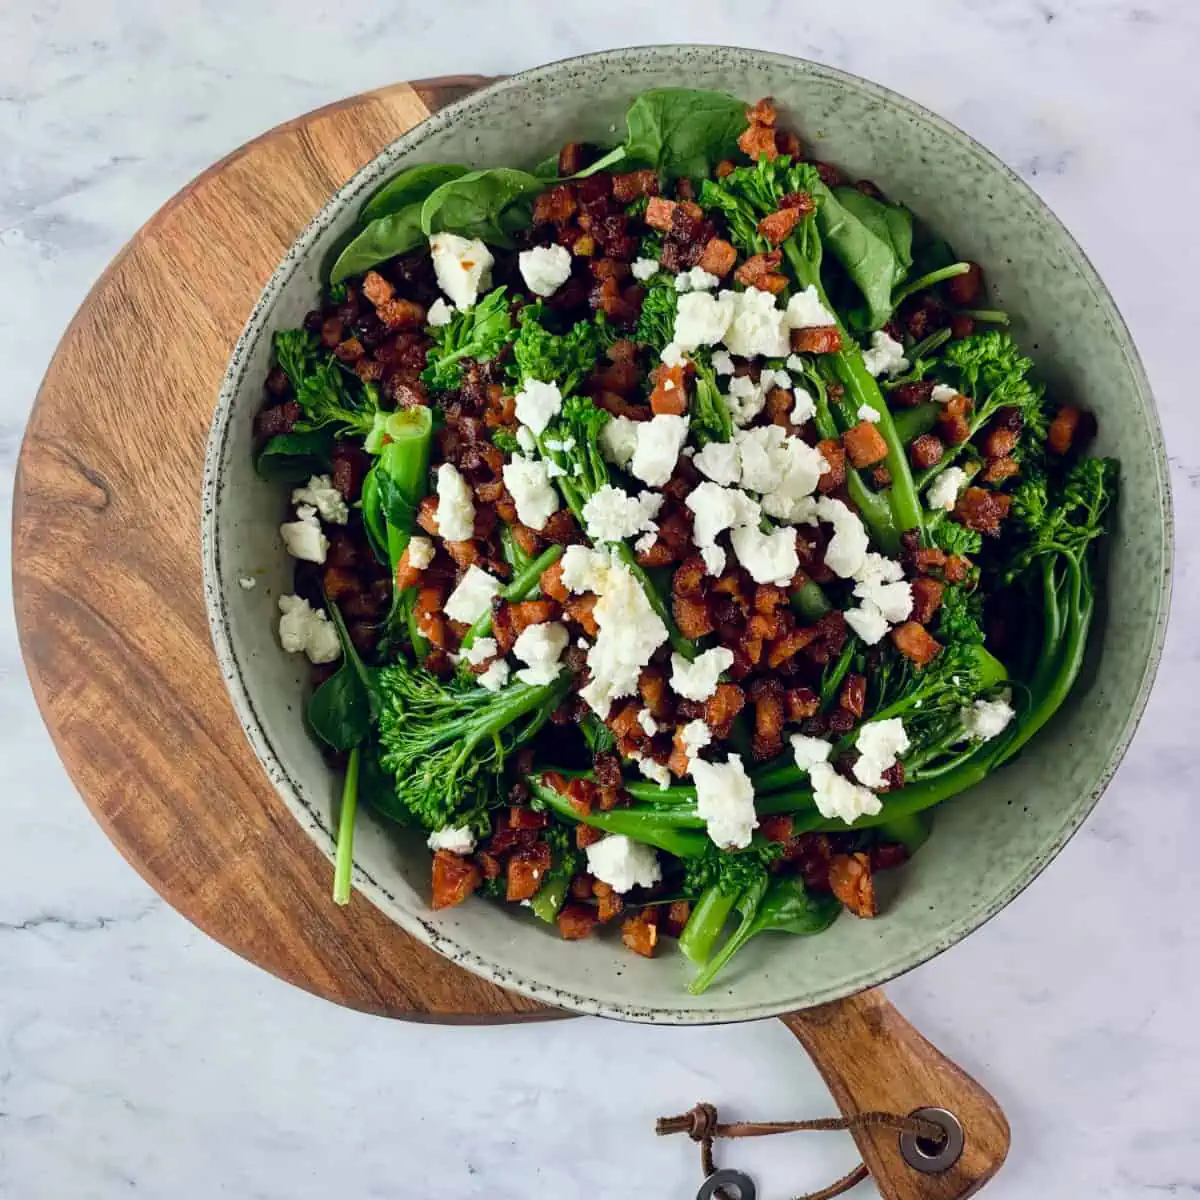 Broccolini salad with crispy chorizo and feta in a ceramic bowl with gold servers.